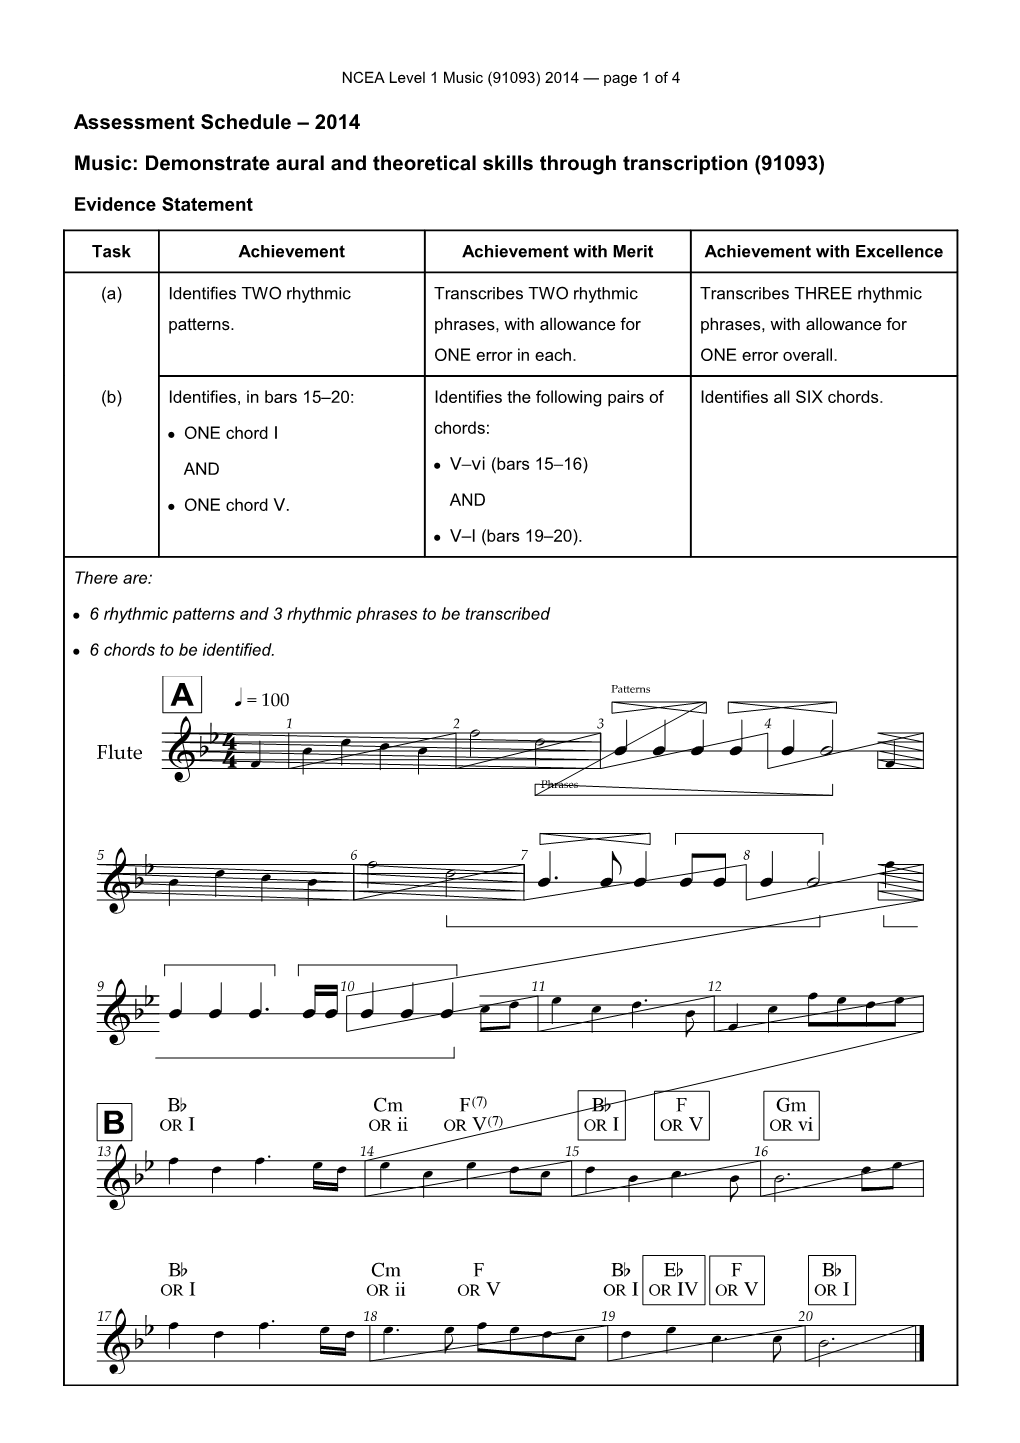 NCEA Level 1 Music (91093) 2014 Assessment Schedule